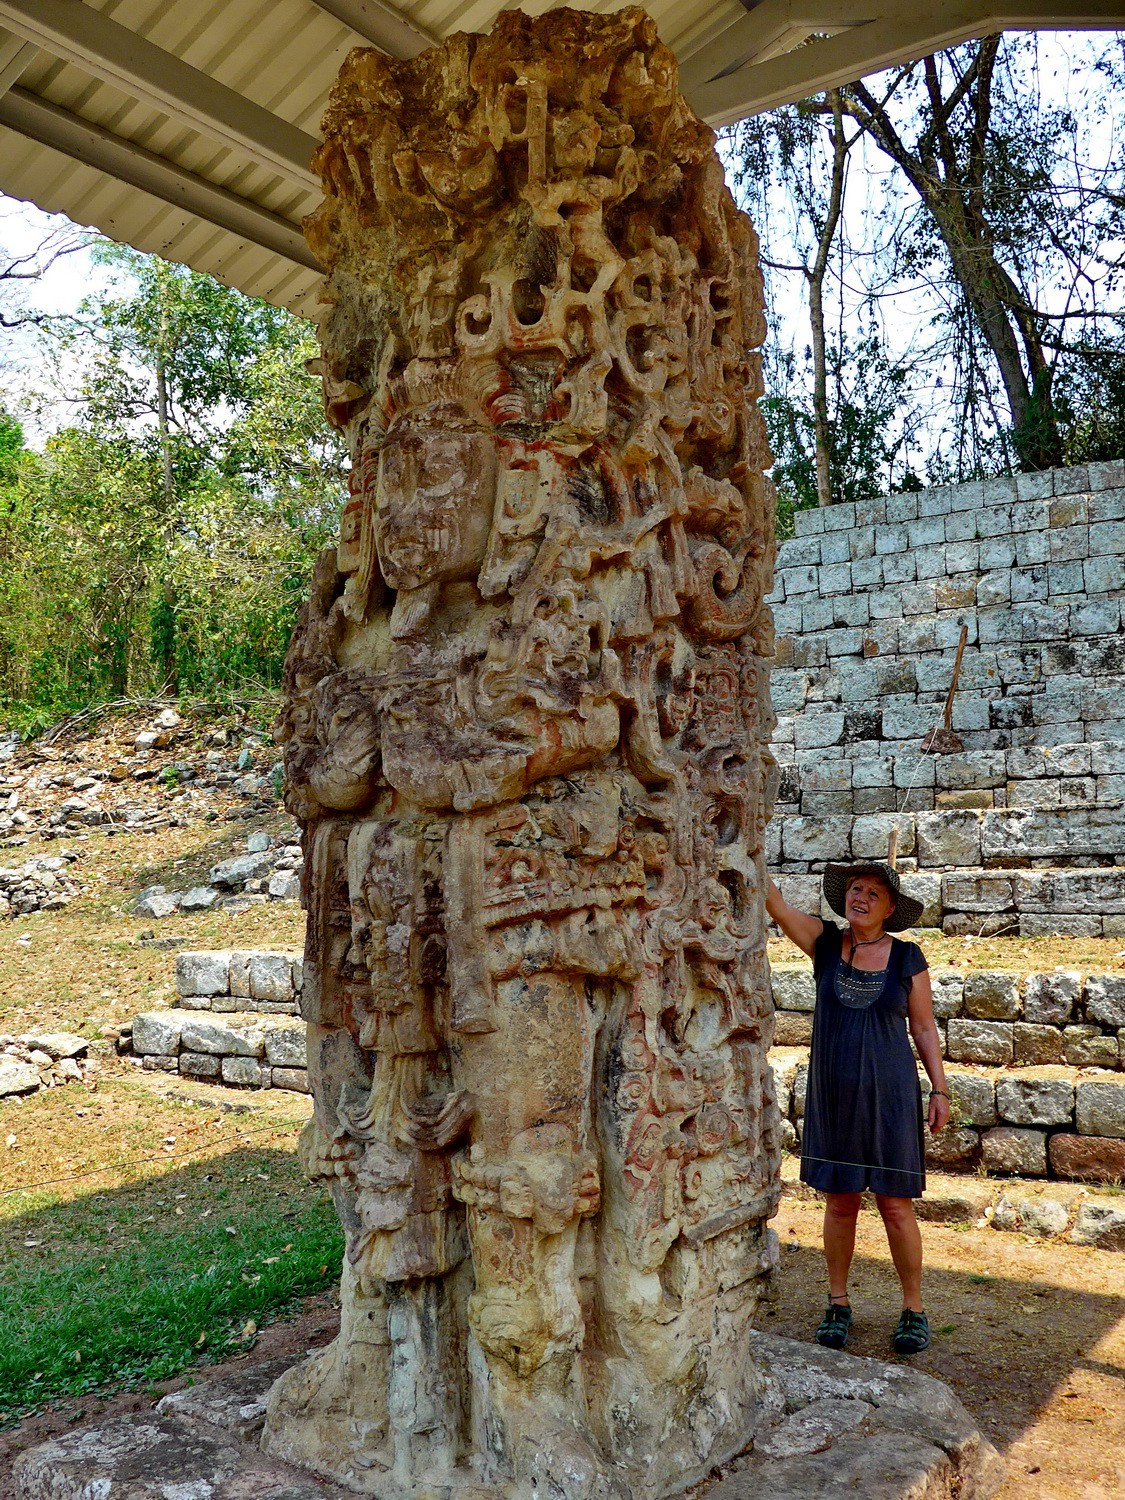 Copan is famous for its sculptures, unique in the Maya world